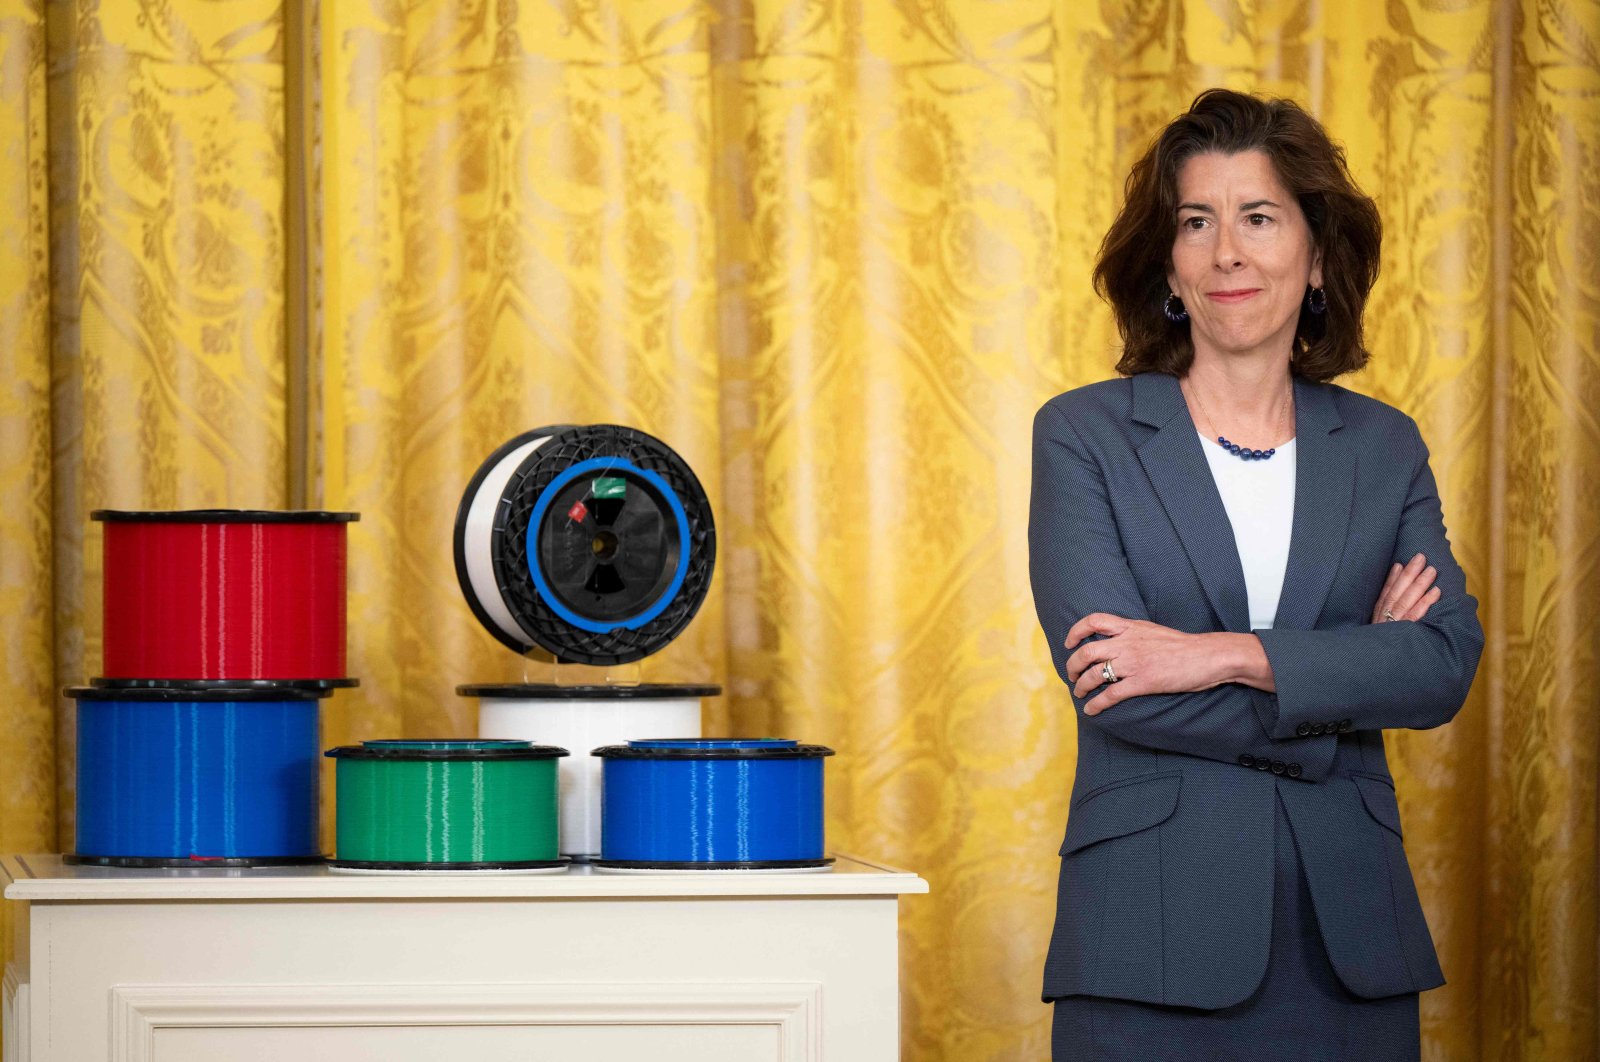 U.S. Secretary of Commerce Gina Raimondo looks on during a high-speed internet infrastructure announcement in the East Room of the White House in Washington, D.C., U.S., June 26, 2023. (AFP Photo)